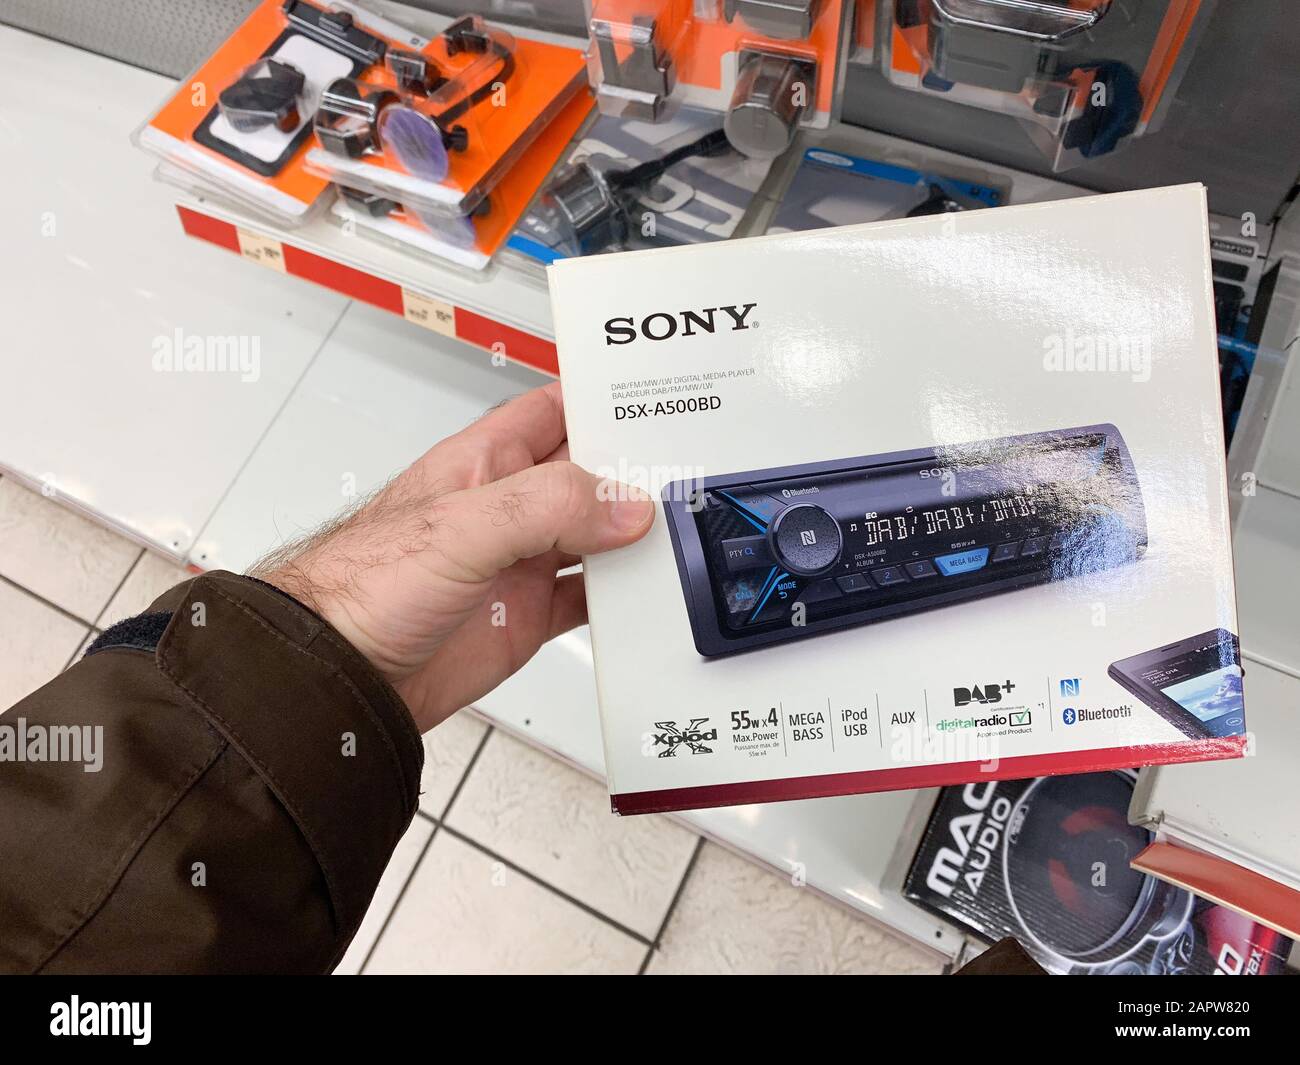 Dortmund, Germany - Mar 25, 2019: Man customer hand holding package of new auto  radio manufactured by SONY modern DXS-A500BD with Xplod , ipad usb  connection and DAB digital radio Stock Photo - Alamy